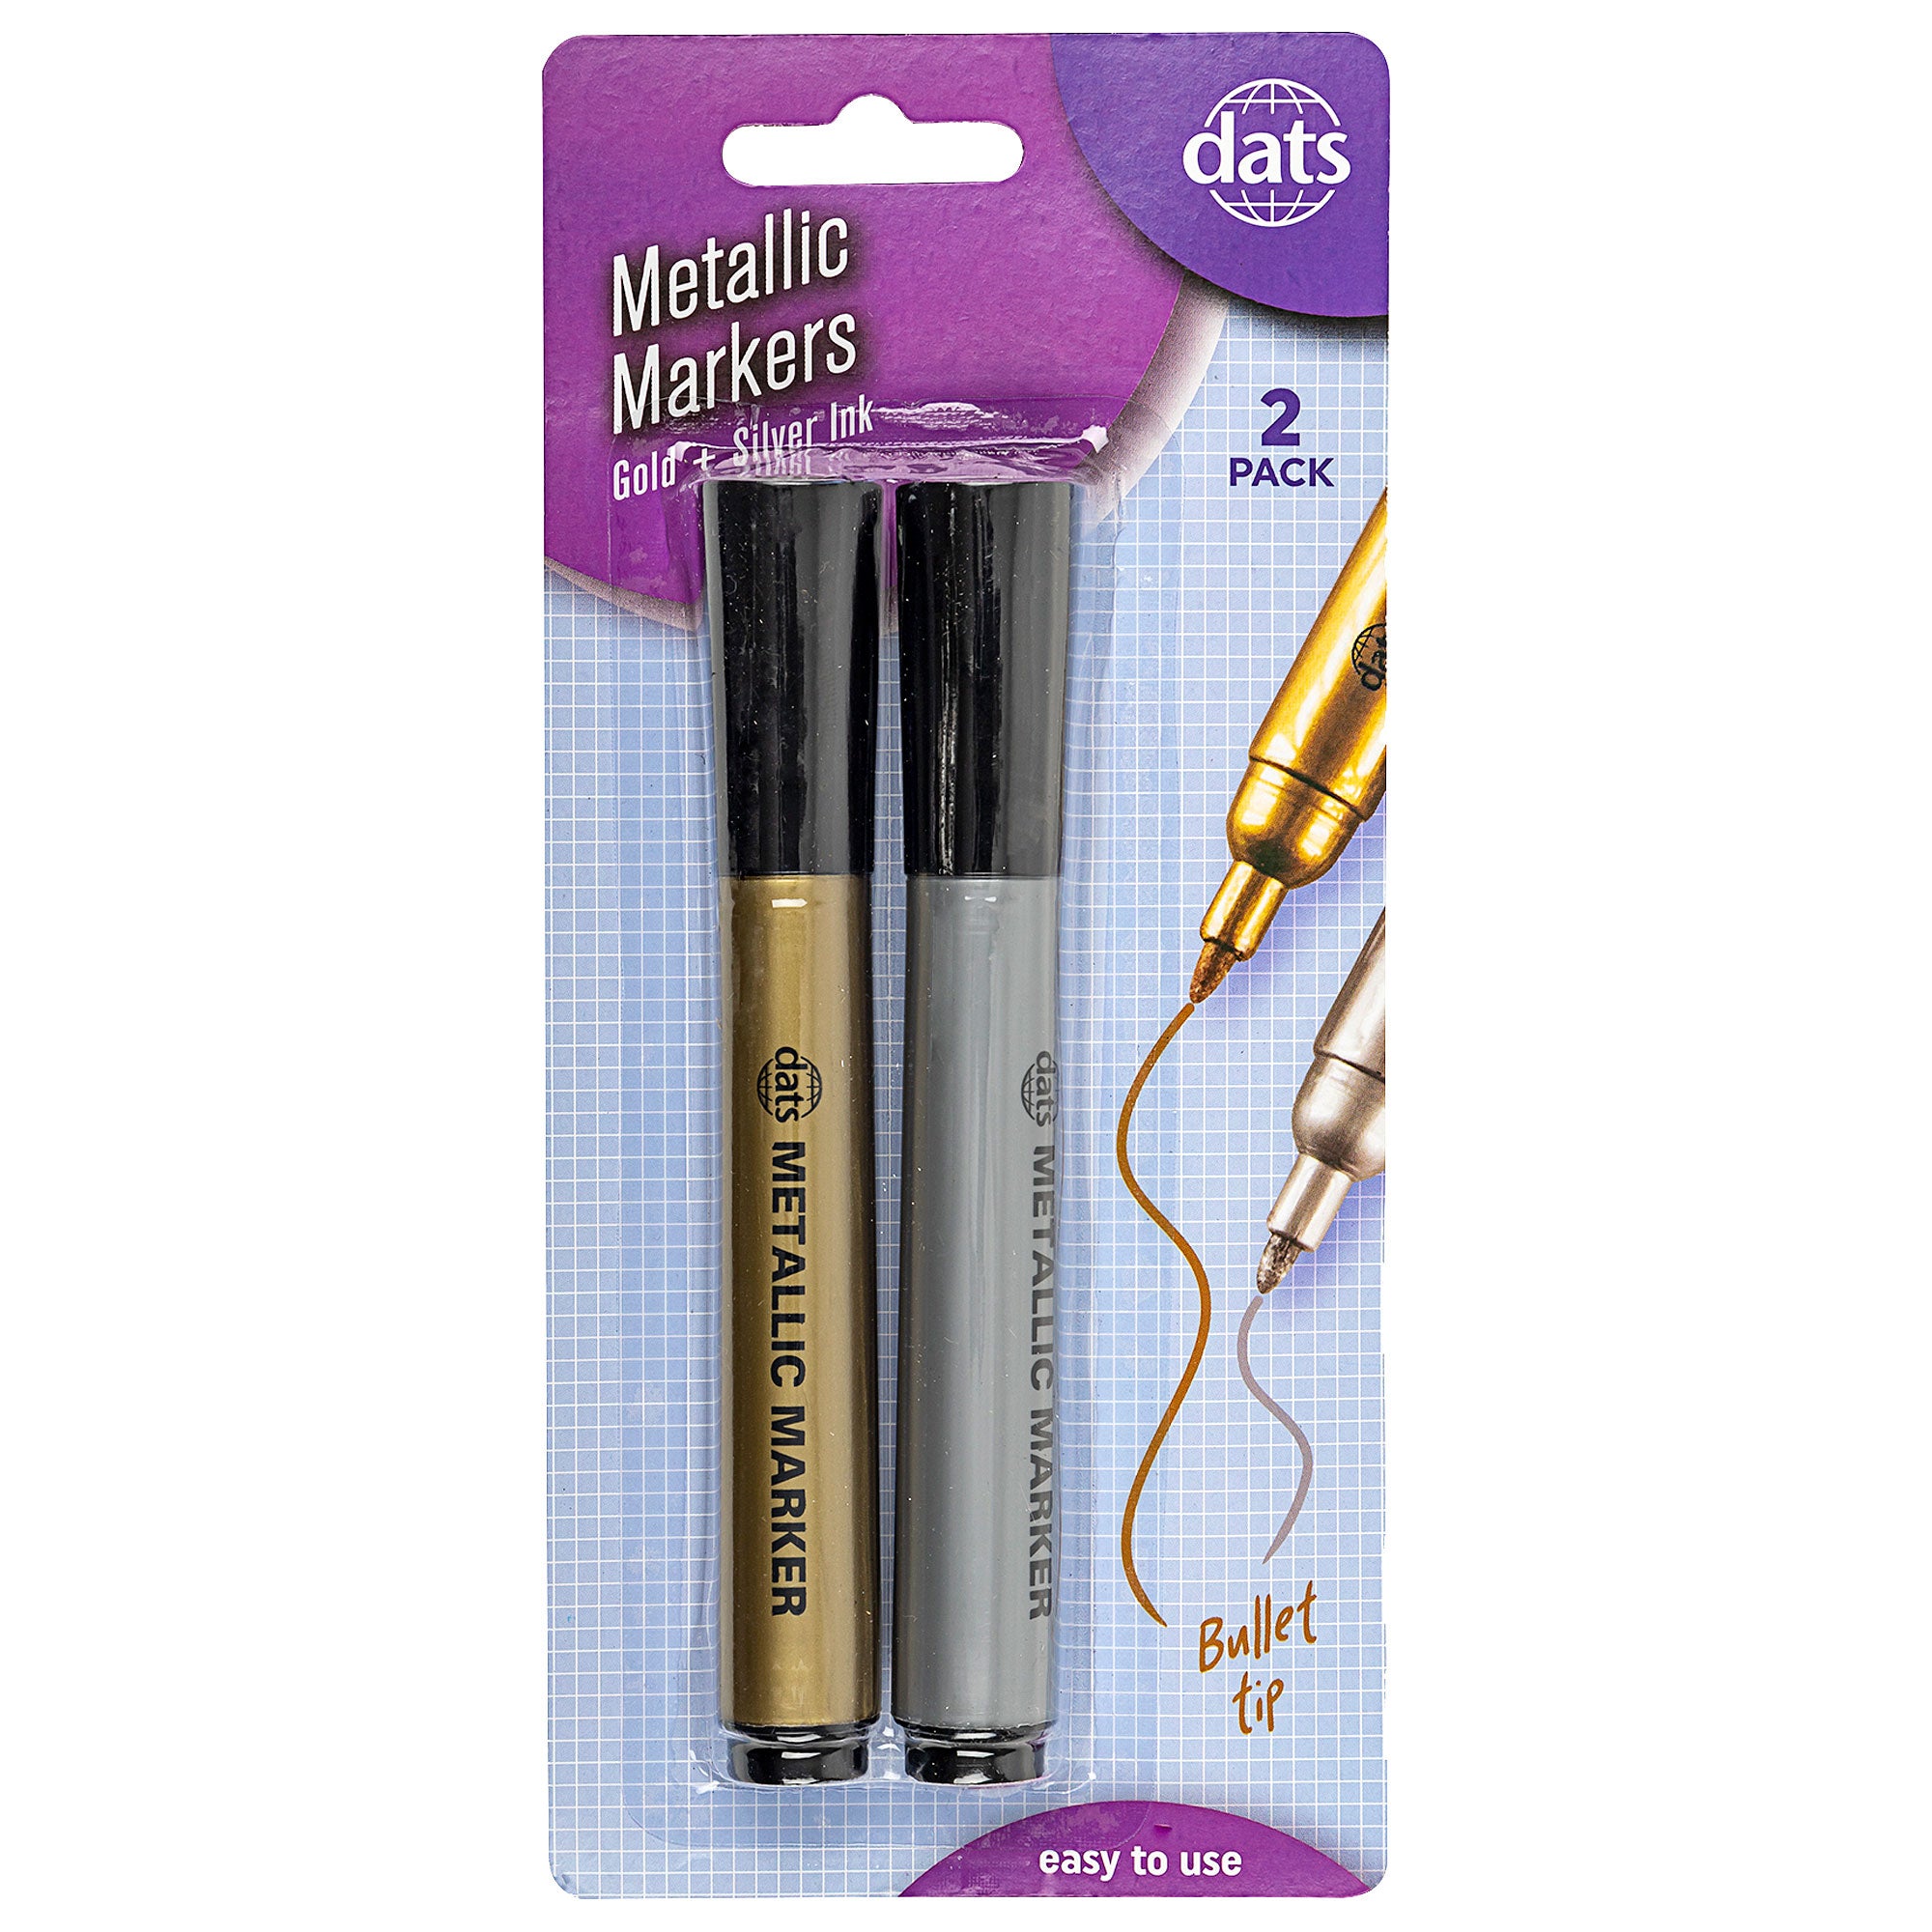 Metallic Markers Gold/Silver